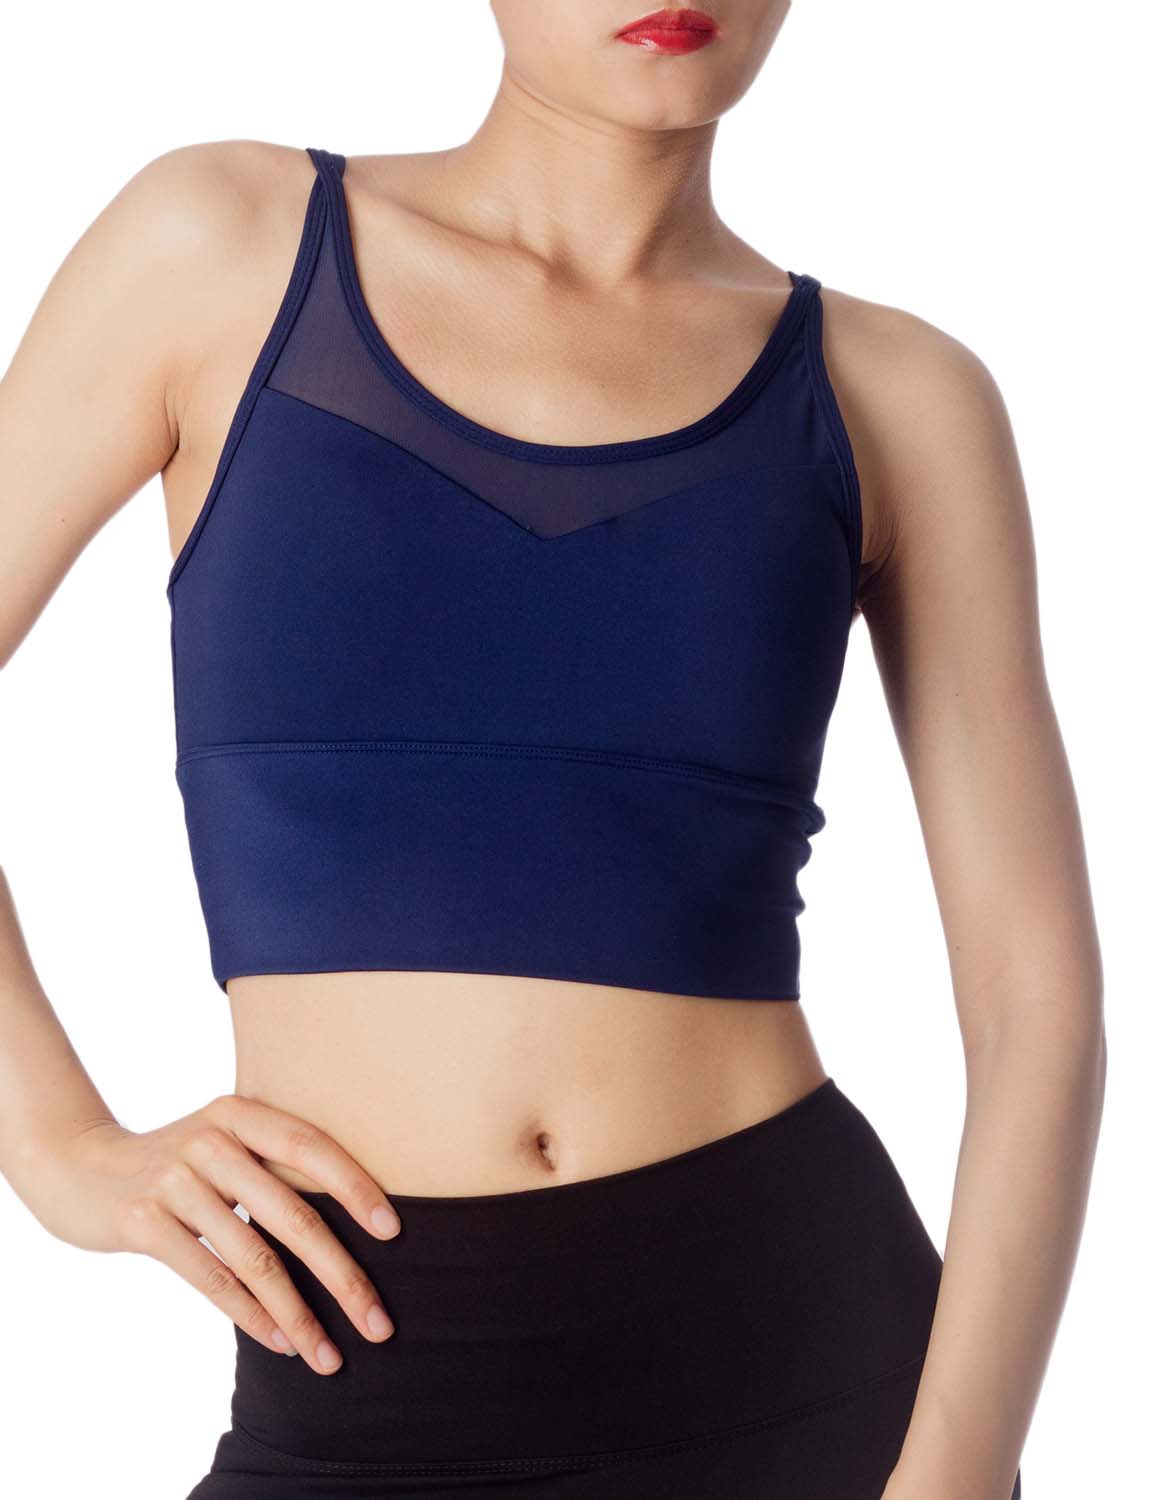 Women's Breathable Non Wire Yoga Fitness Bralette Gym Padded Sports Bra